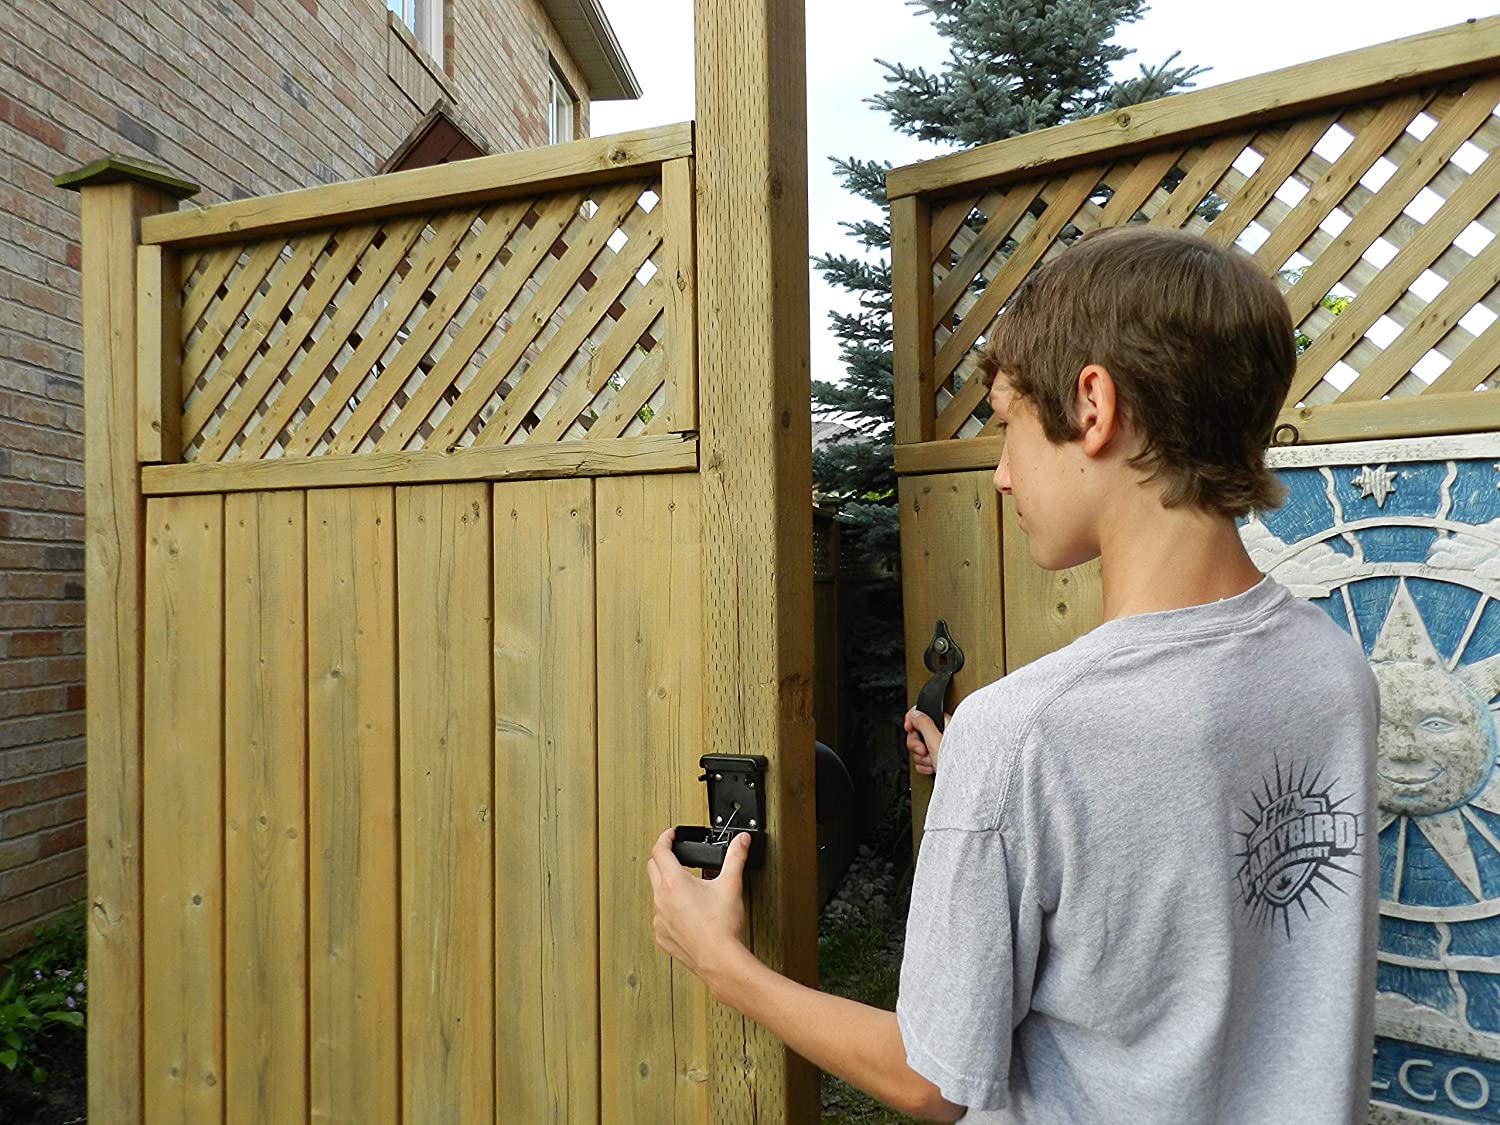 A young person using the best gate latch option to open a gate in a fence